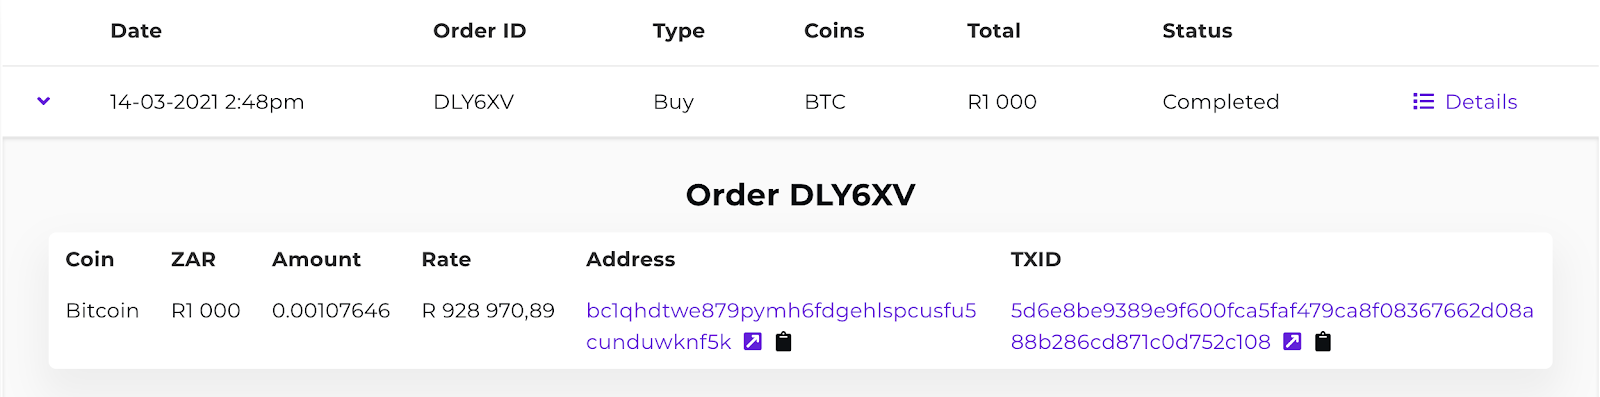 Screenshot of a Bitcoin purchase order from Easy Crypto.